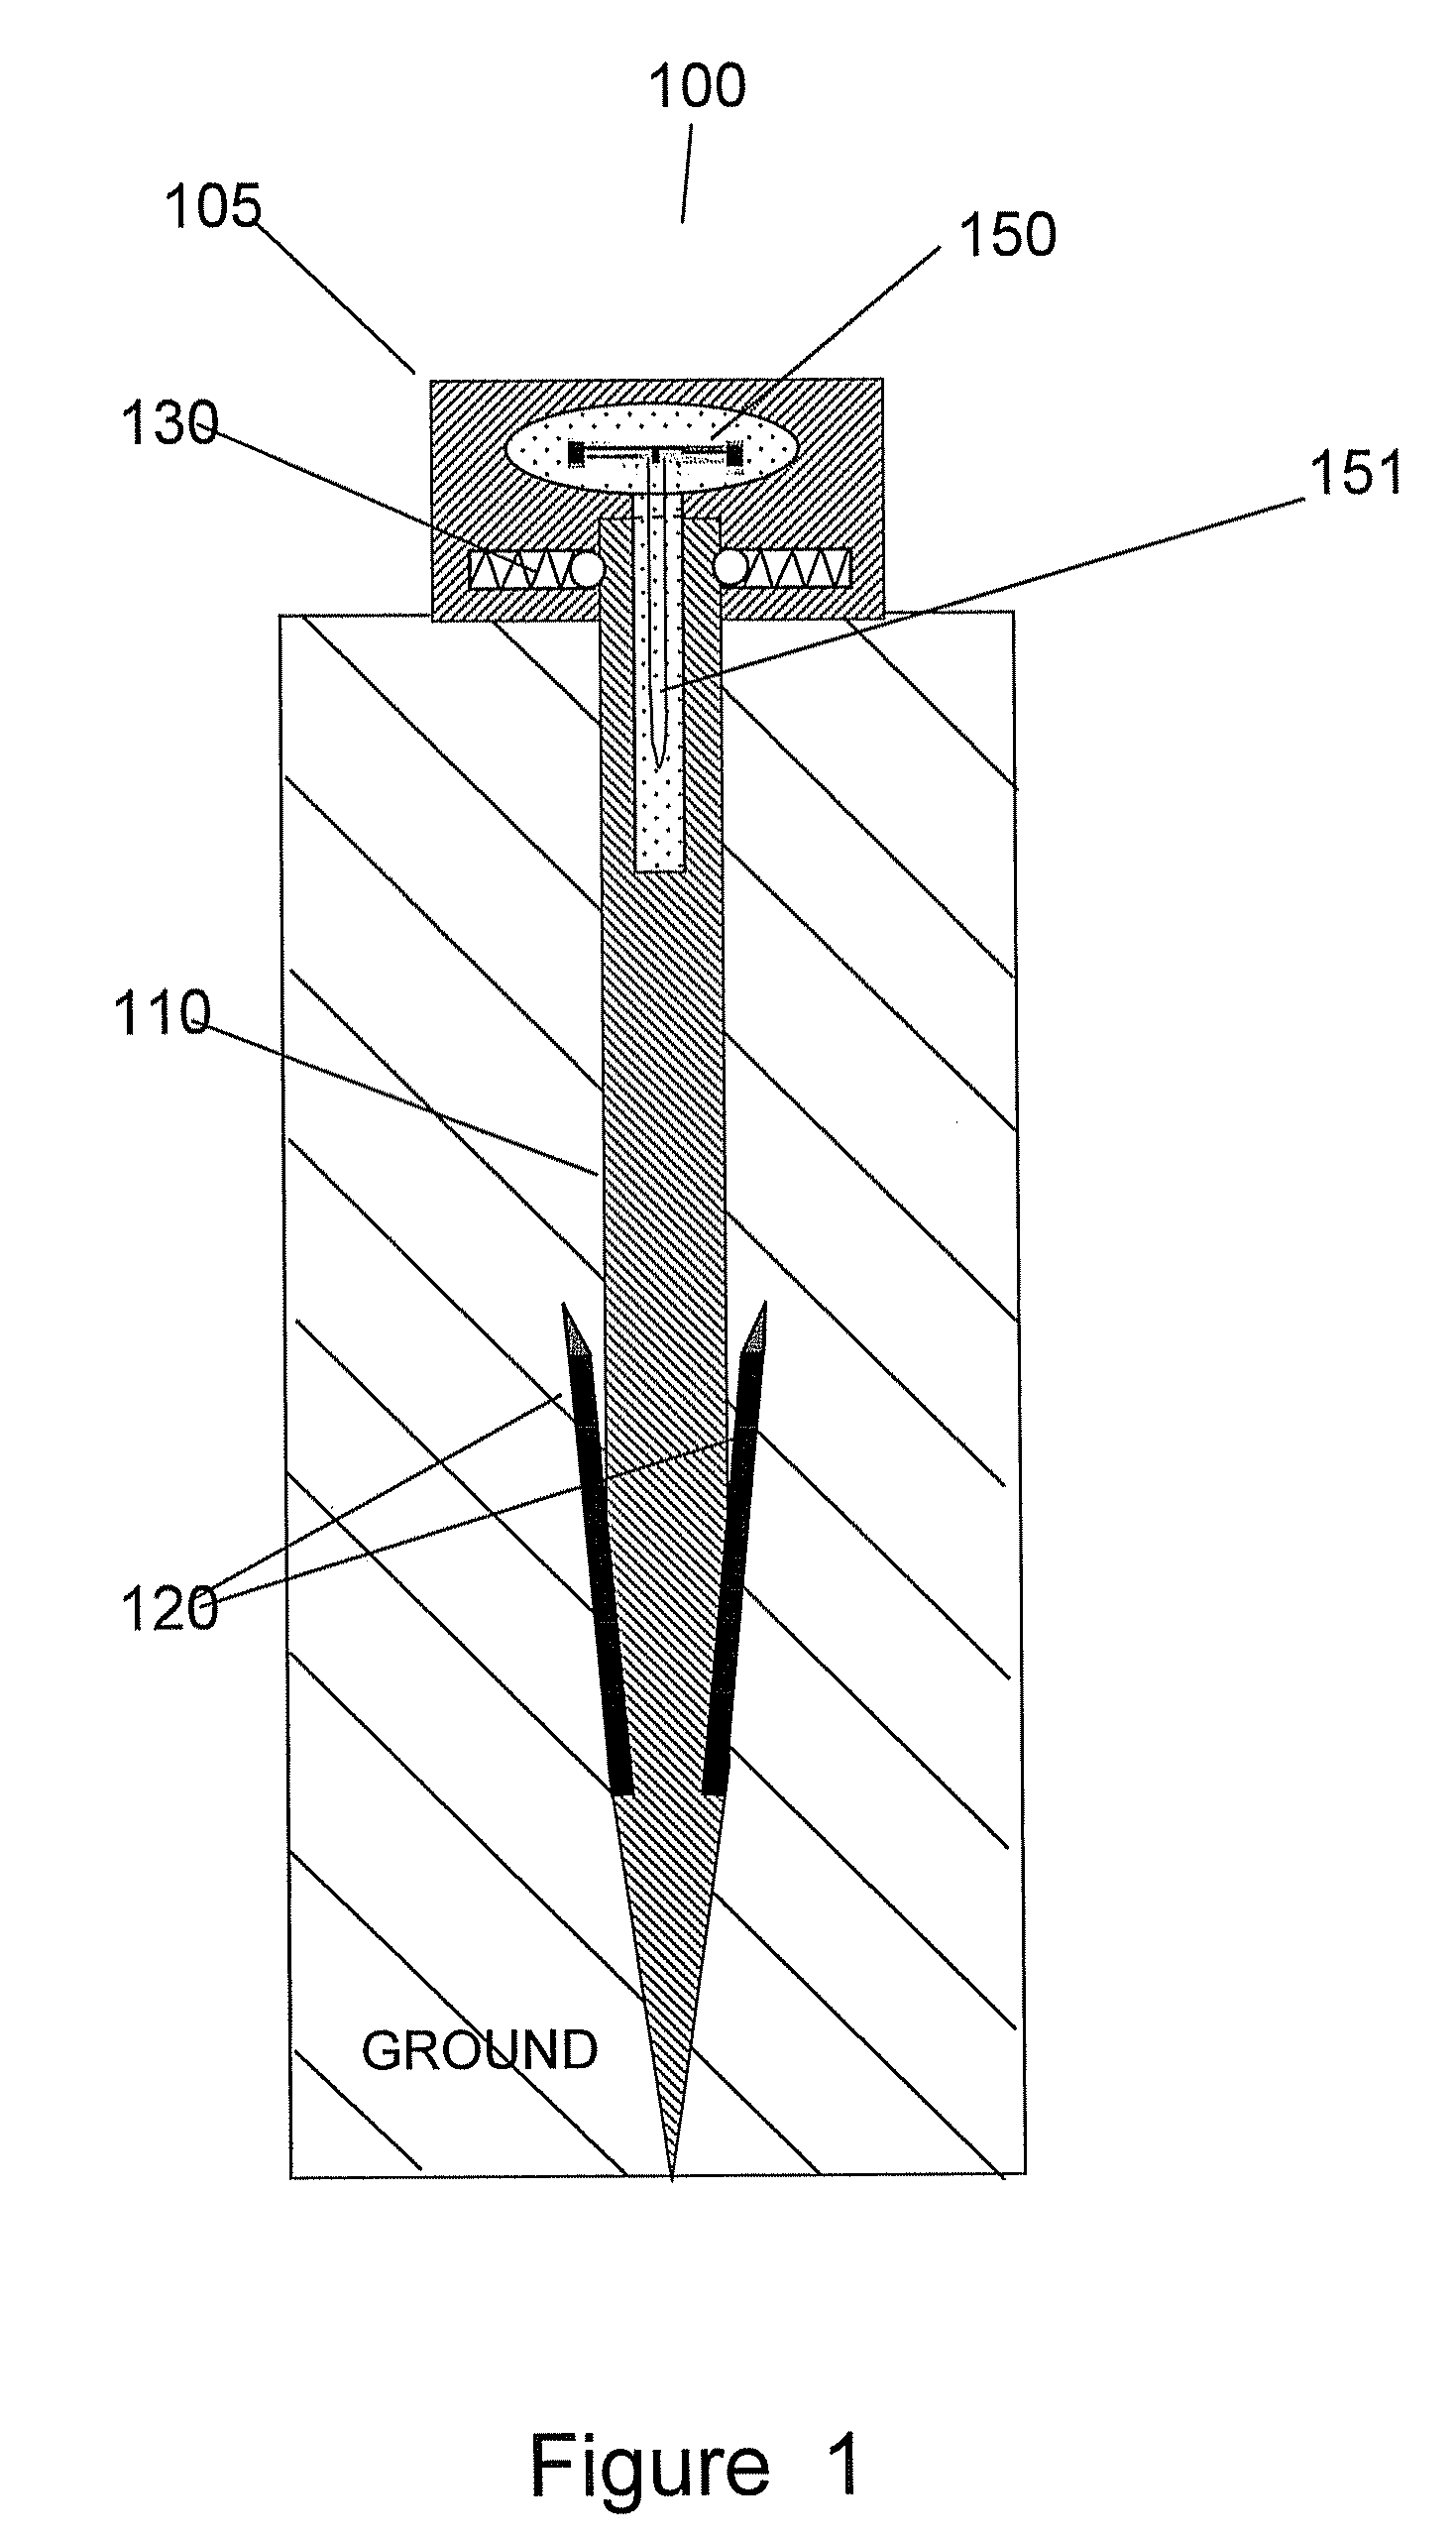 Apparatus for securing a land surveyor'S mark based on the use of a radio frequency identifier tag